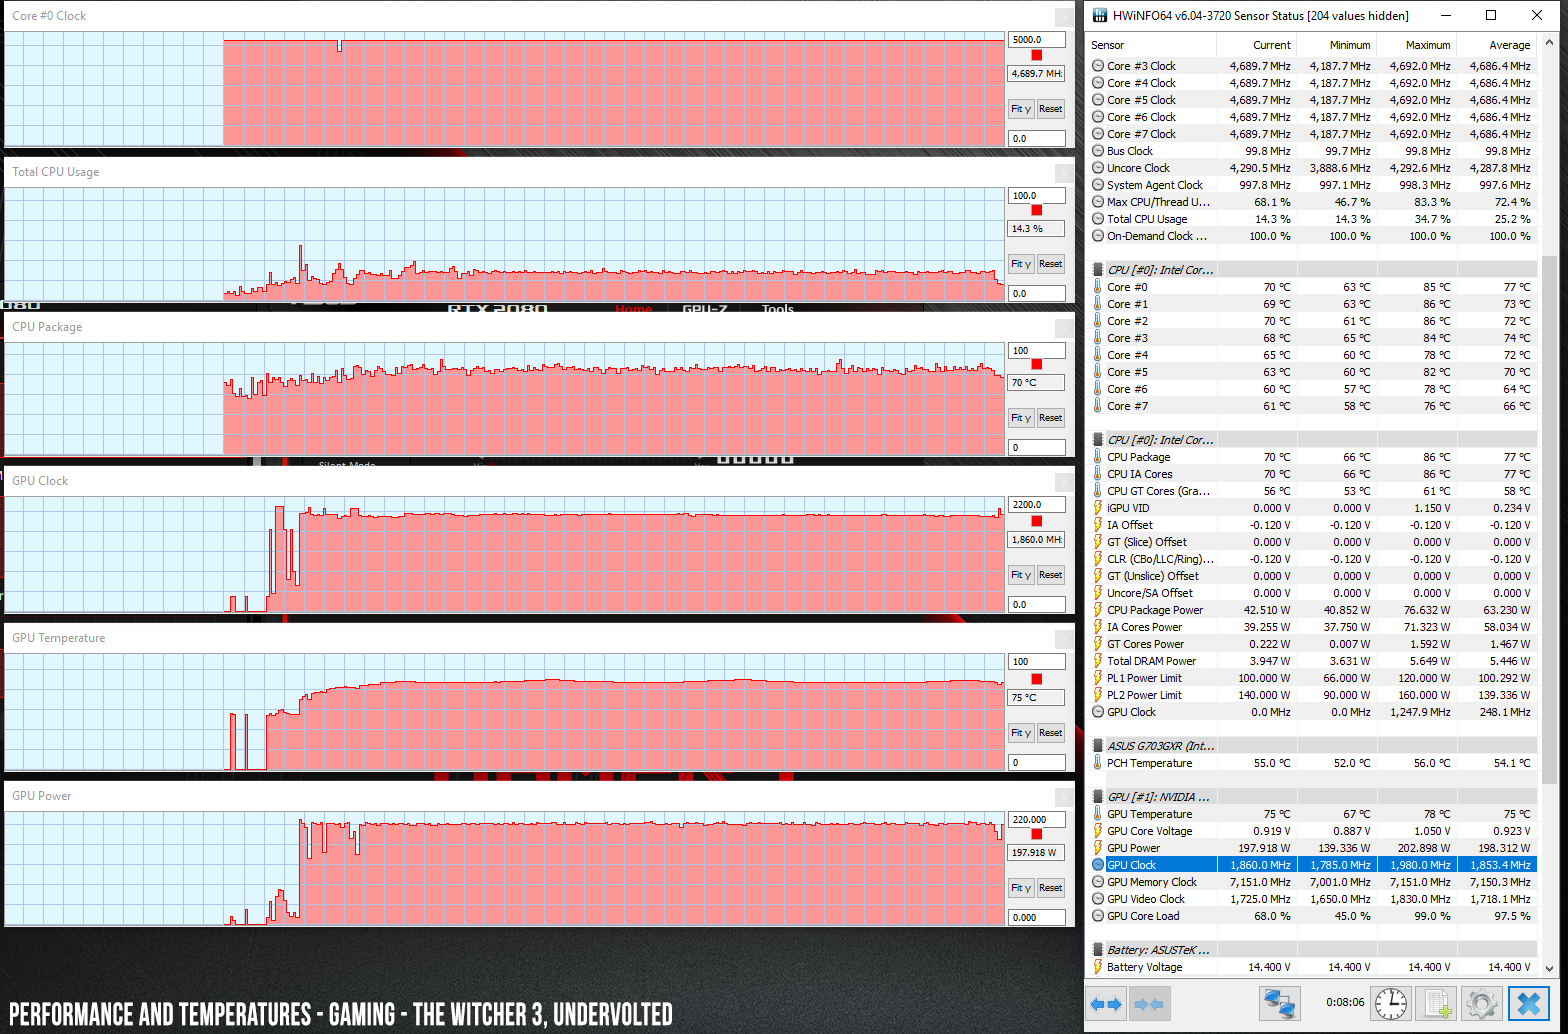 perf temps gaming witcher3 undervolted120 turbo